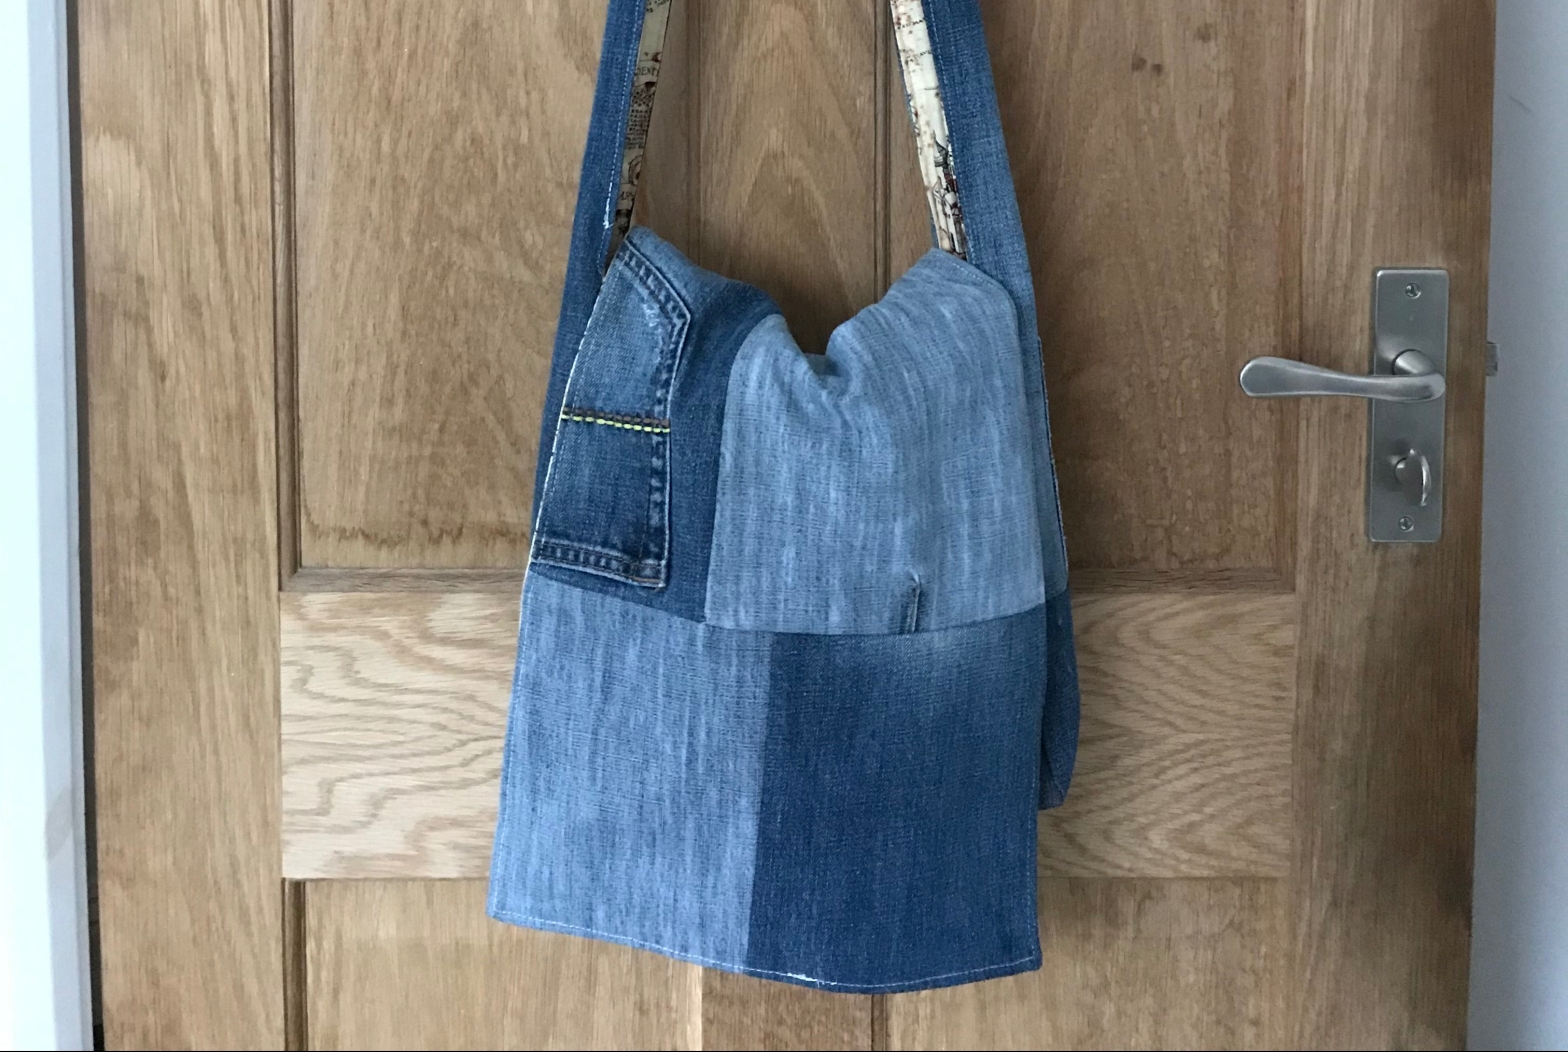 Handmade haven made a messenger bag from old jeans and lined it with marauders map fabric